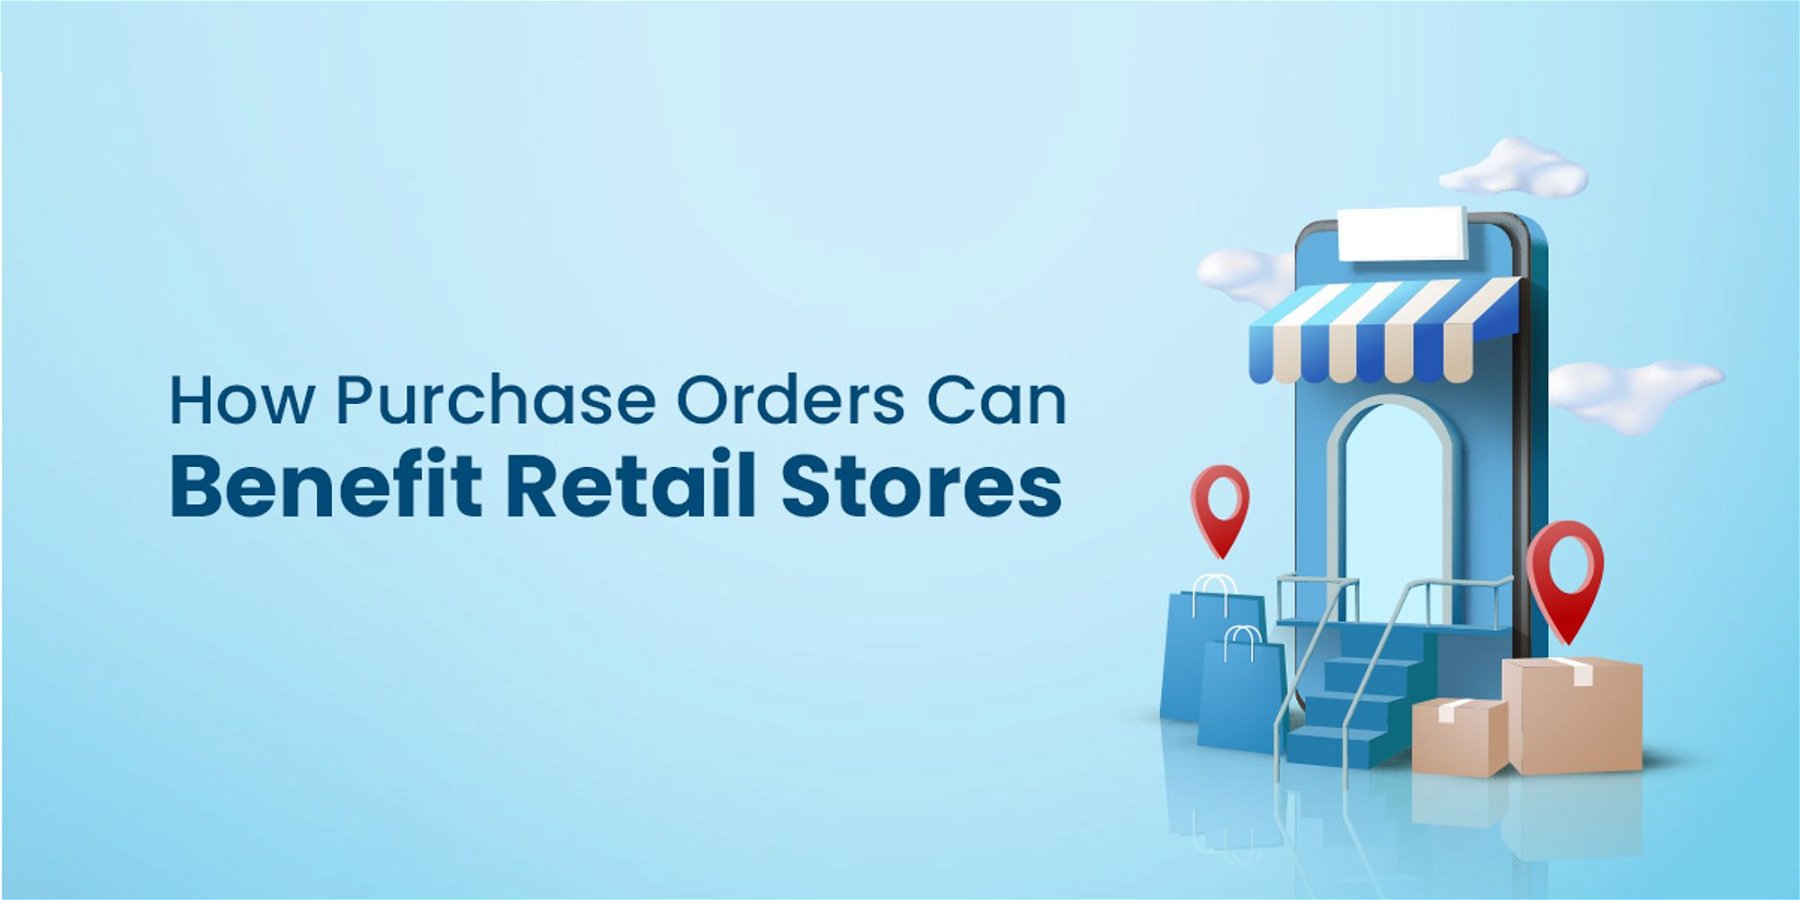 How Purchase Orders Can Benefit Retail Stores